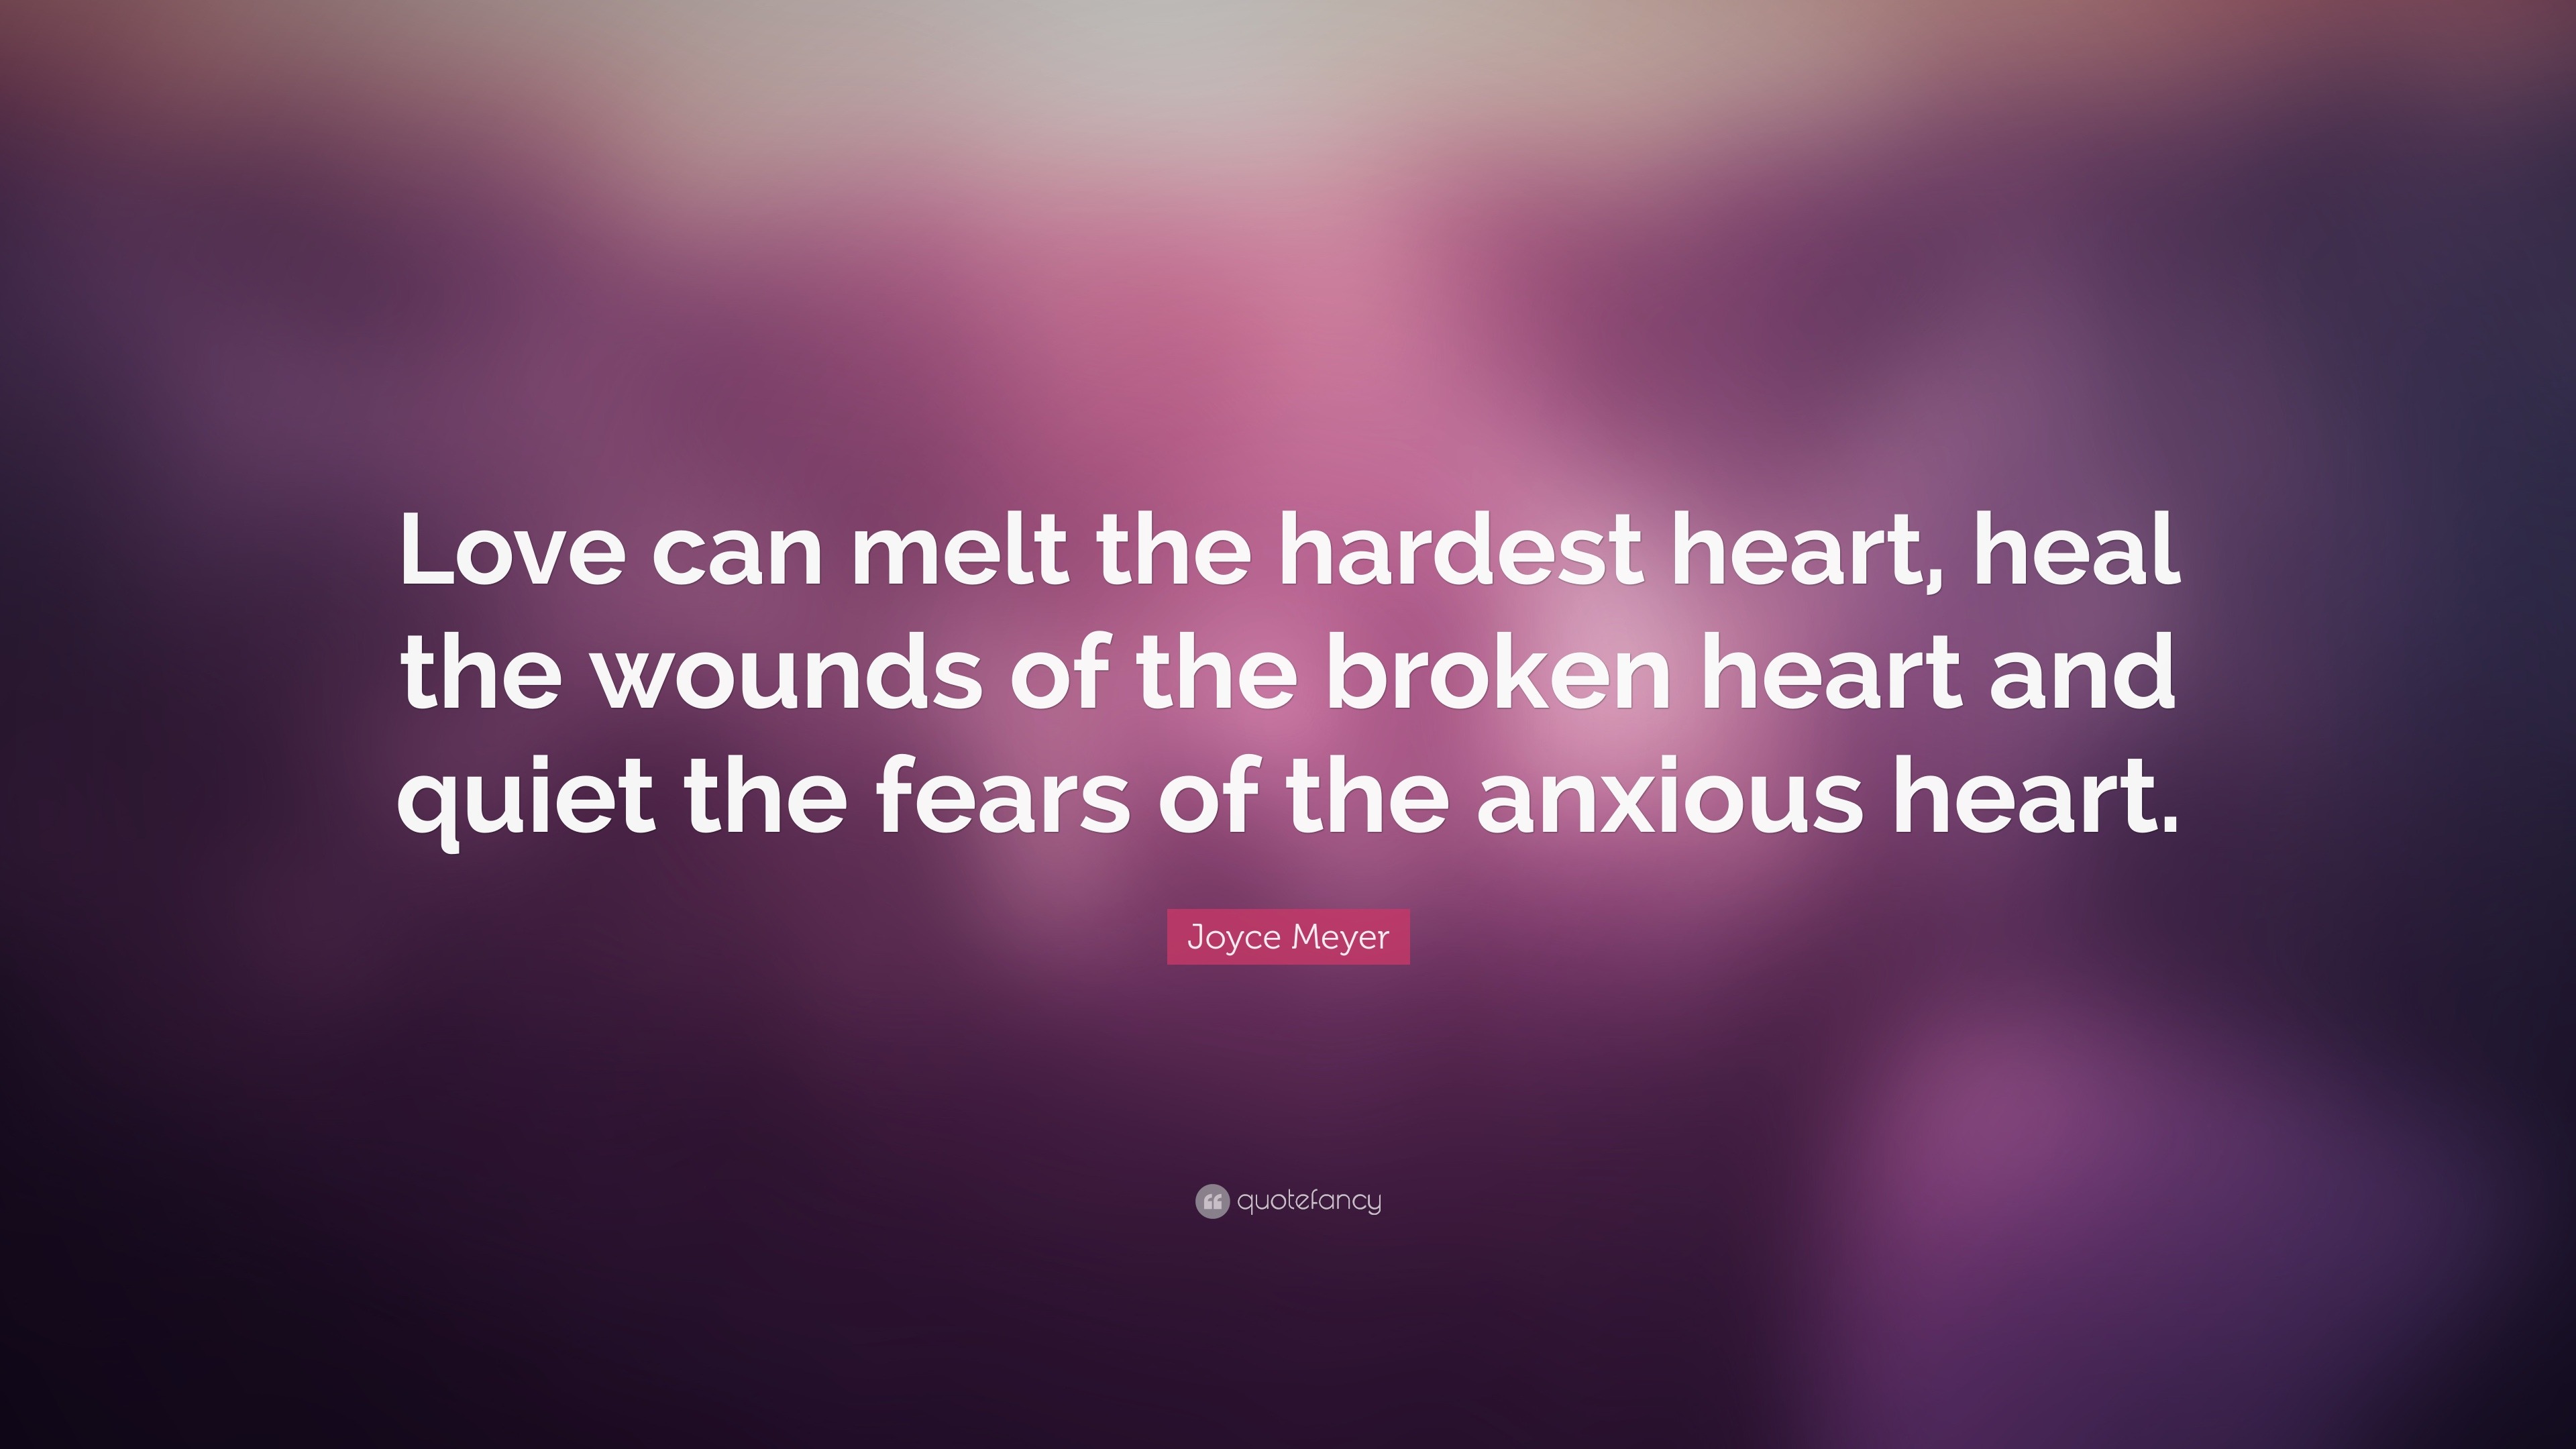 Joyce Meyer Quote: “Love can melt the hardest heart, heal the wounds of ...